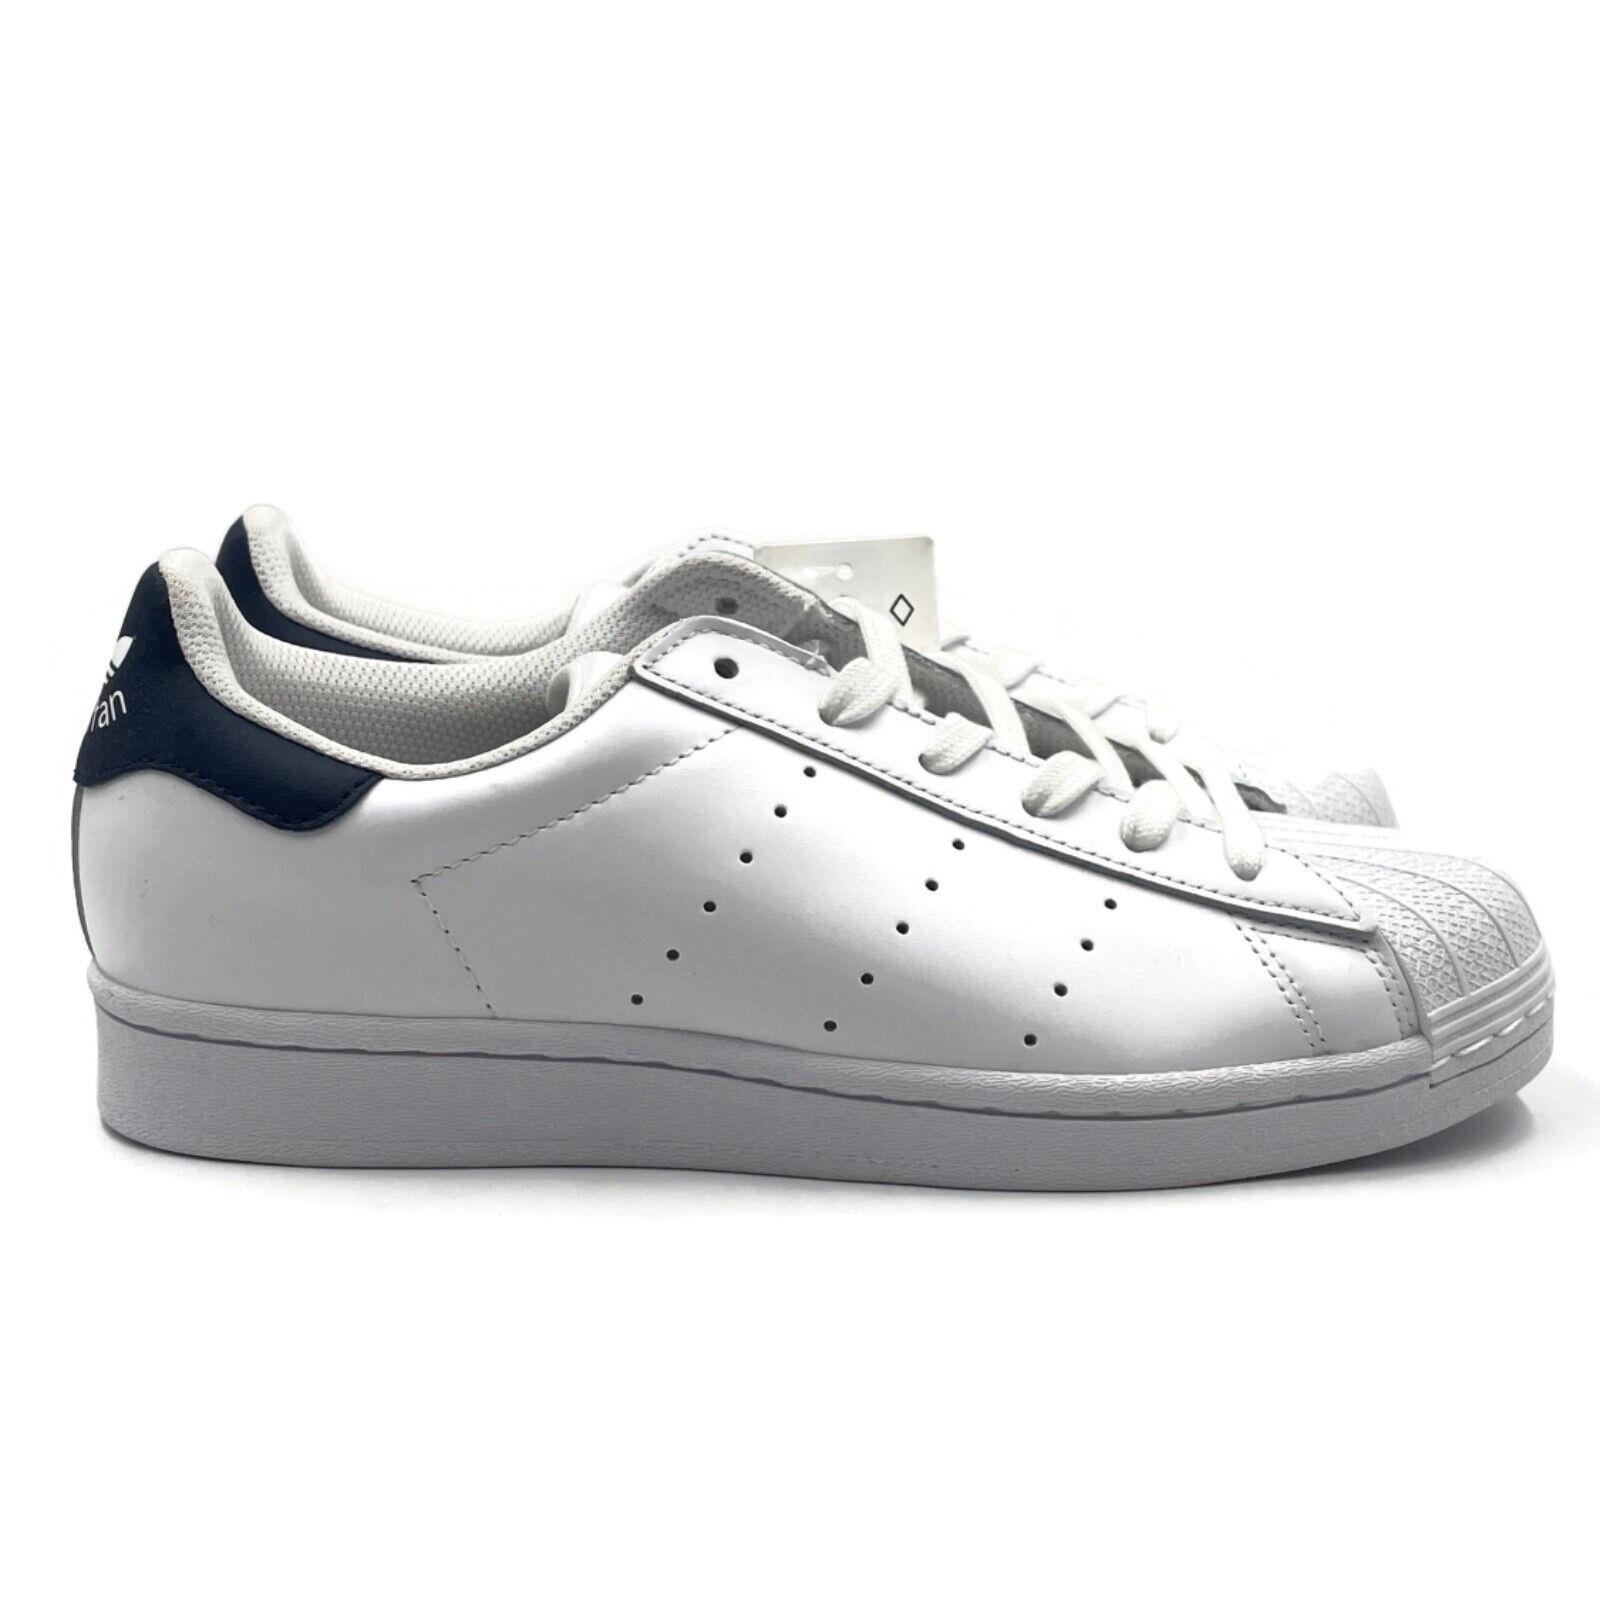 Adidas Superstan Womens Casual Retro Shoe White Blue Athletic Trainer Sneaker